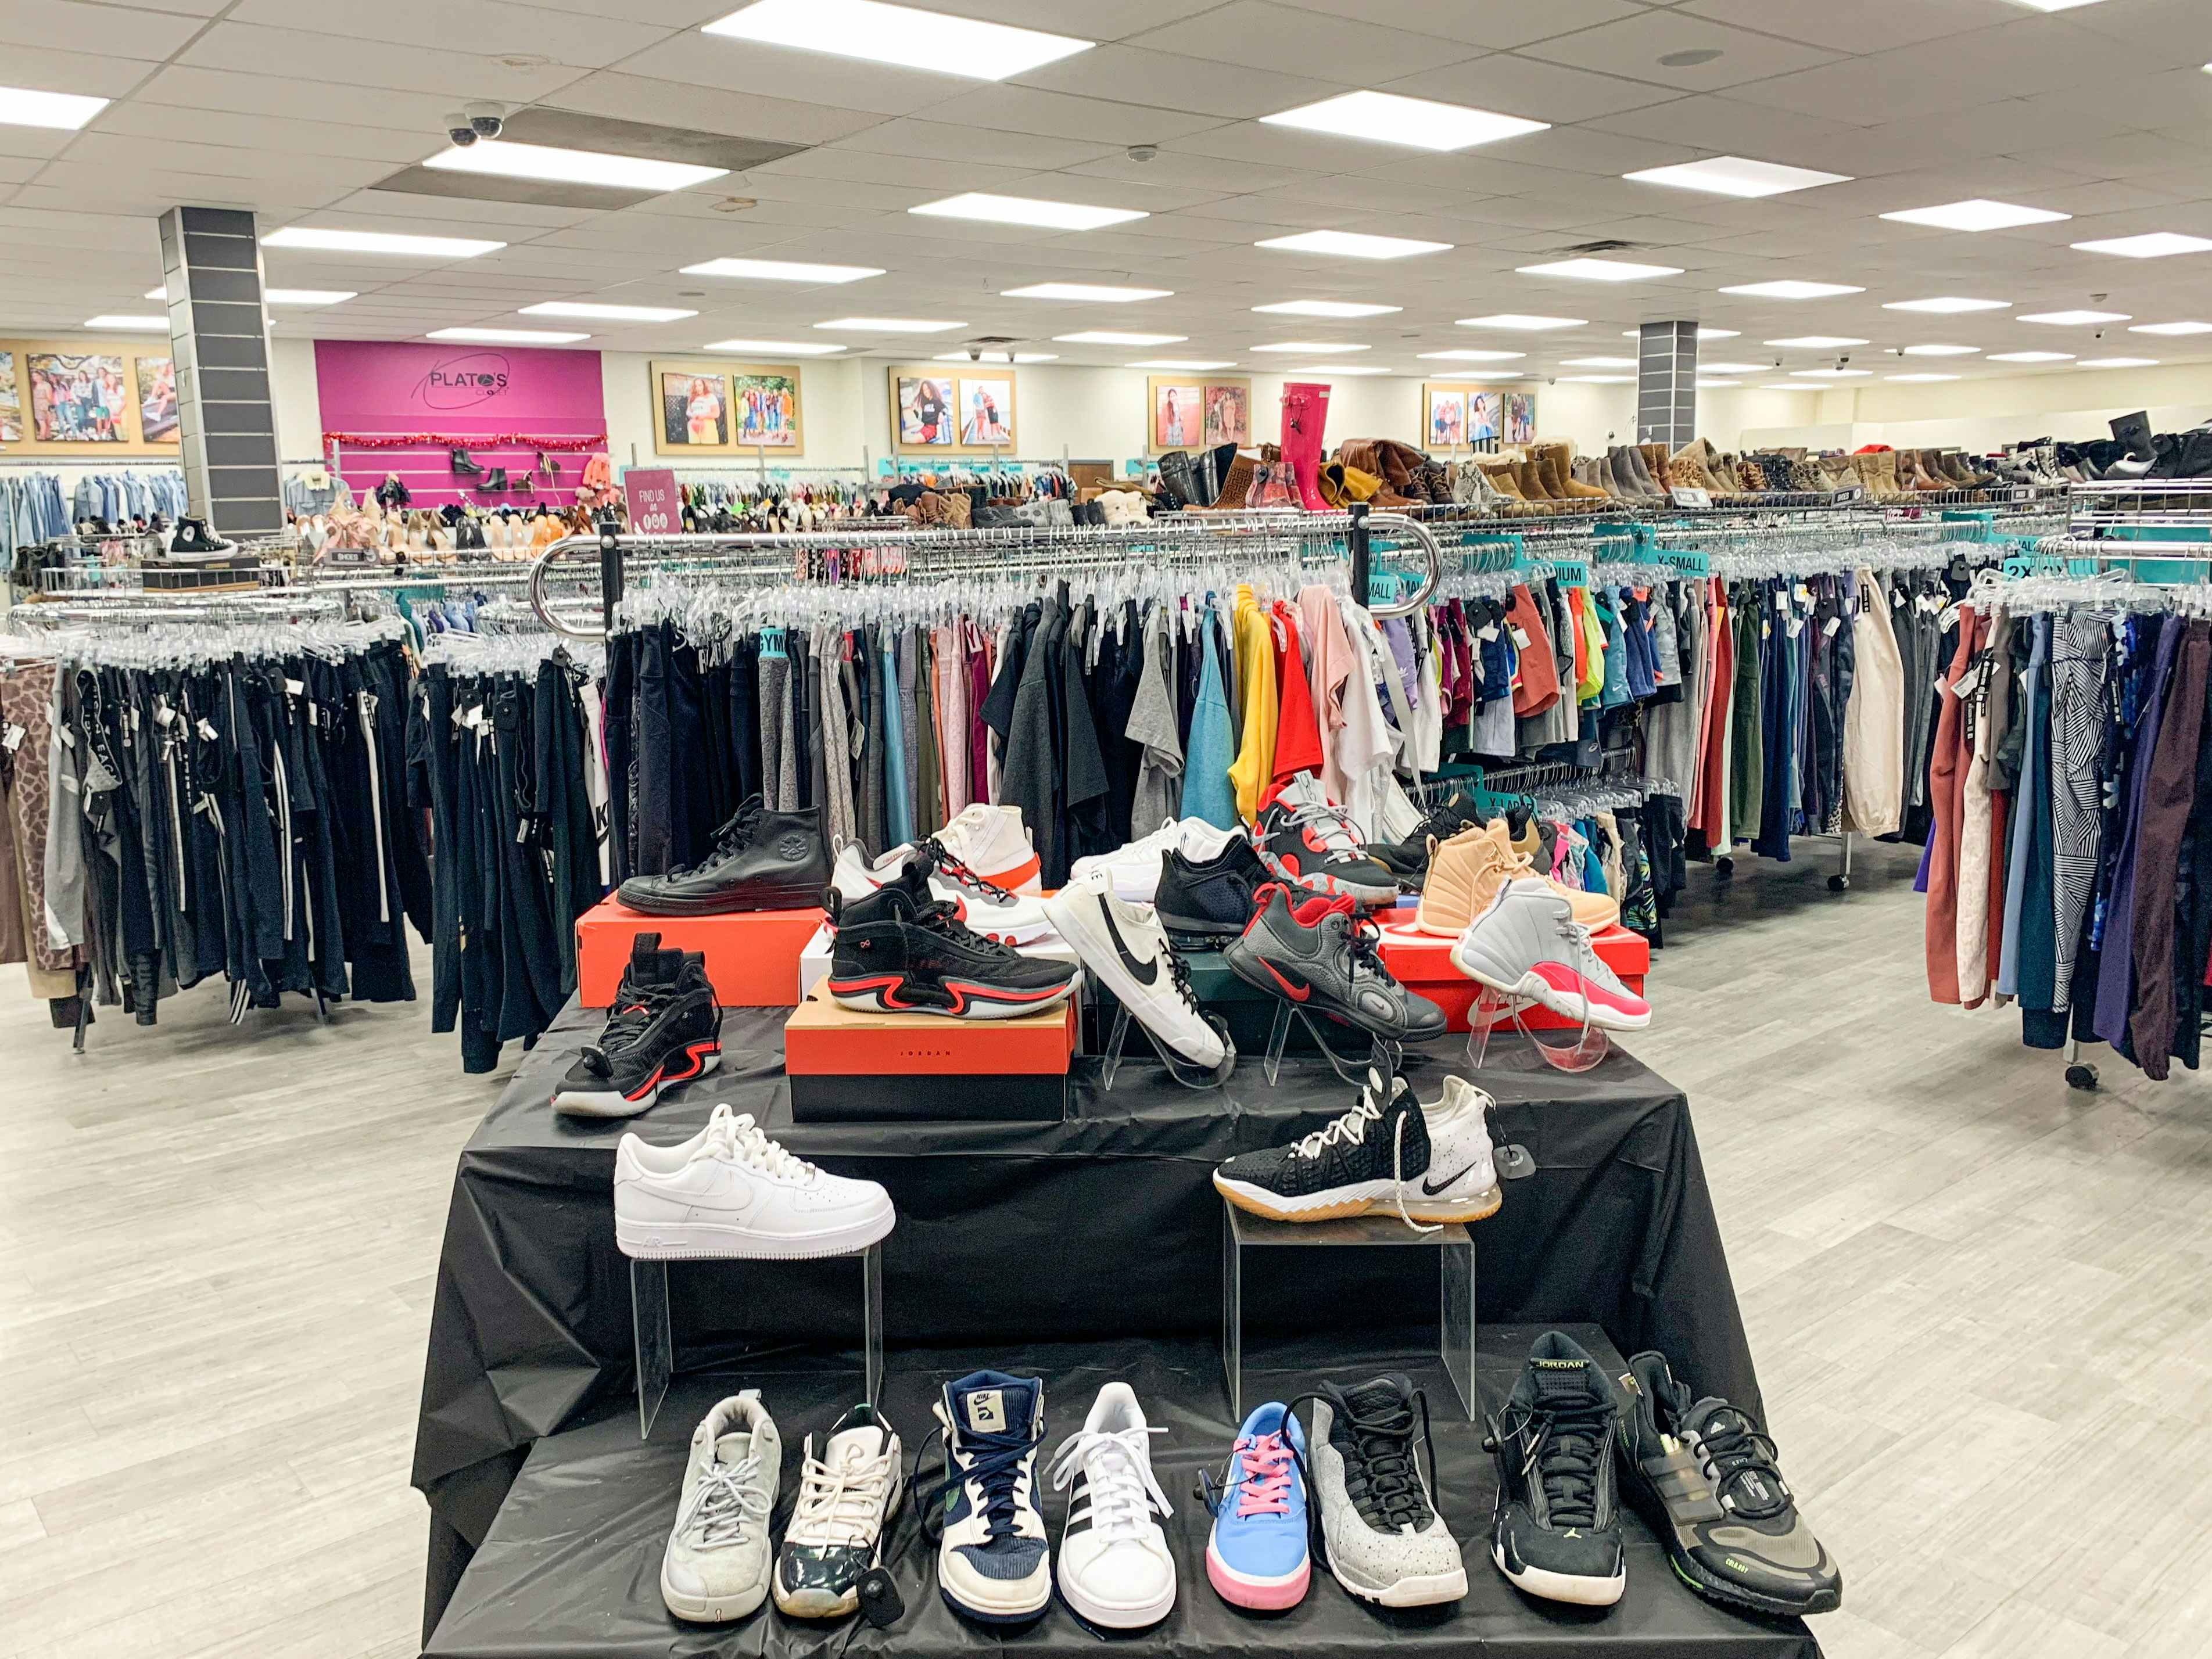 The Beginner's Guide to Consignment Stores, Thrift Shops and More - Man vs  Debt